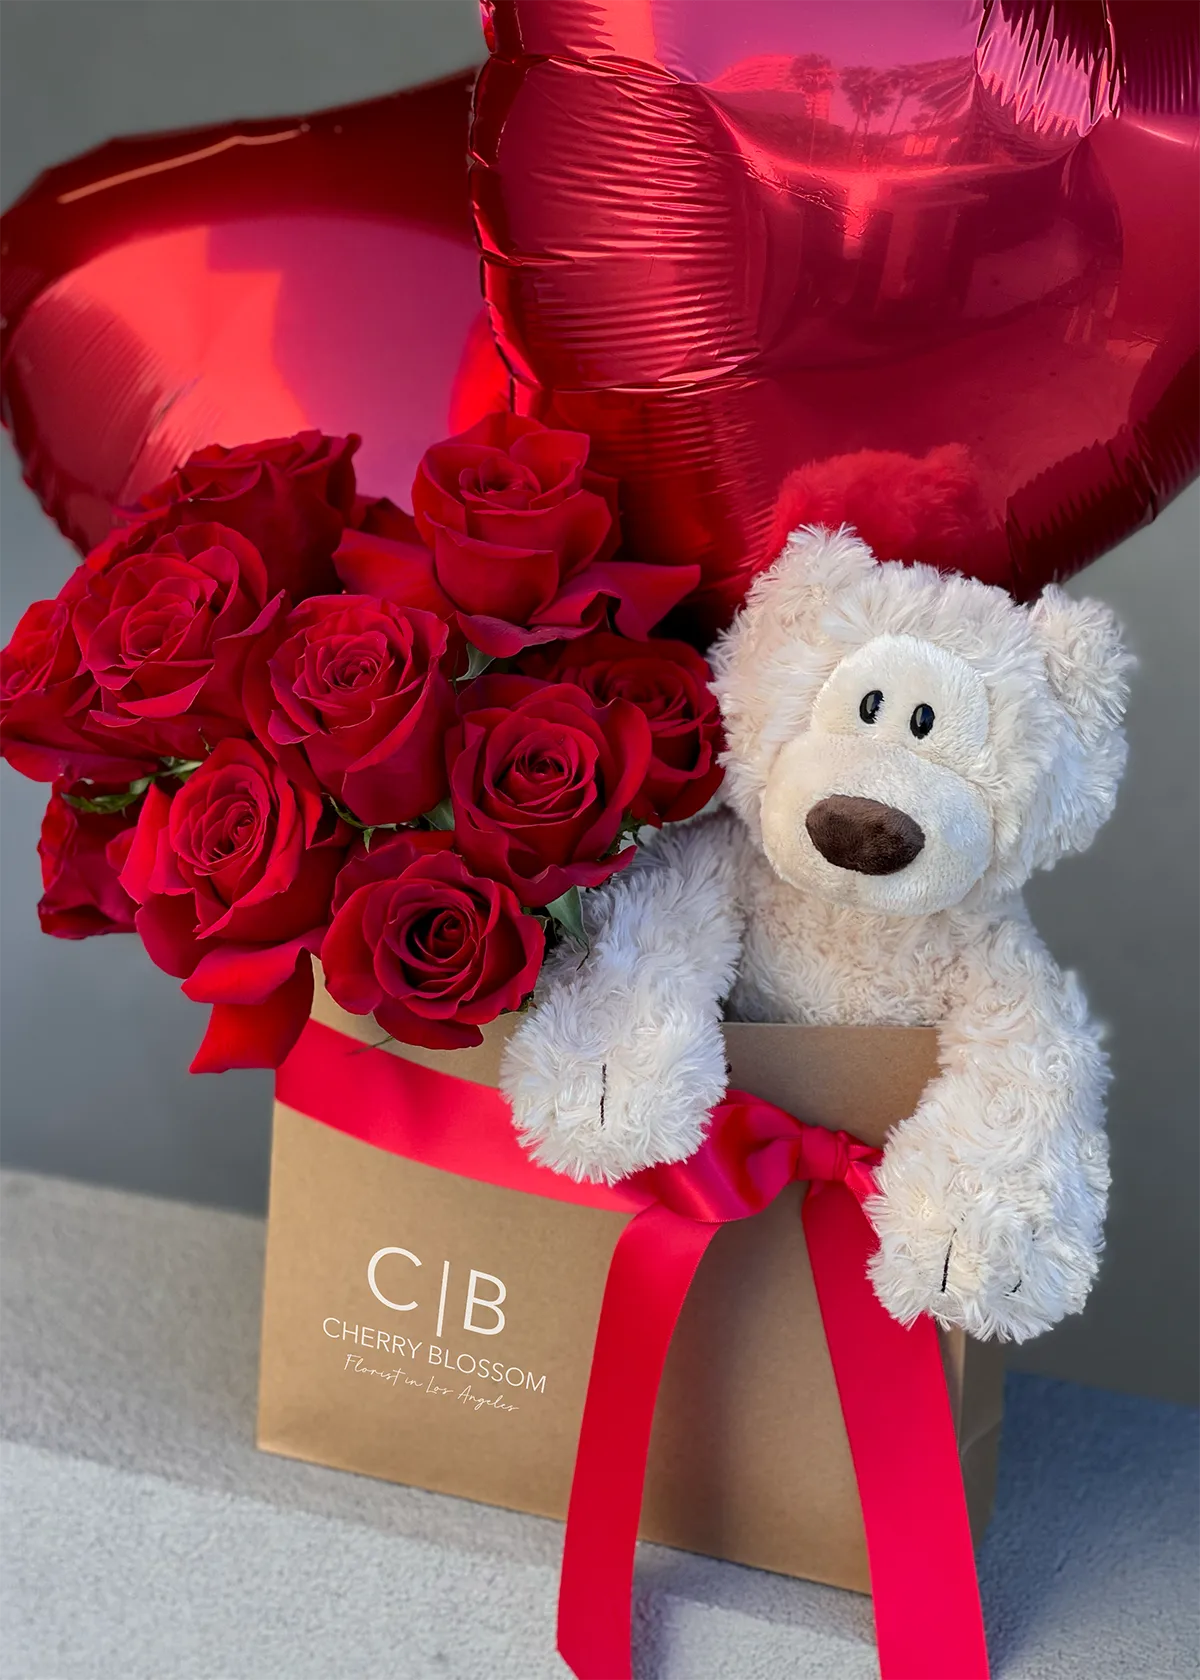 NO. 132. Valentine's Day Gift (roses, bear, balloons)